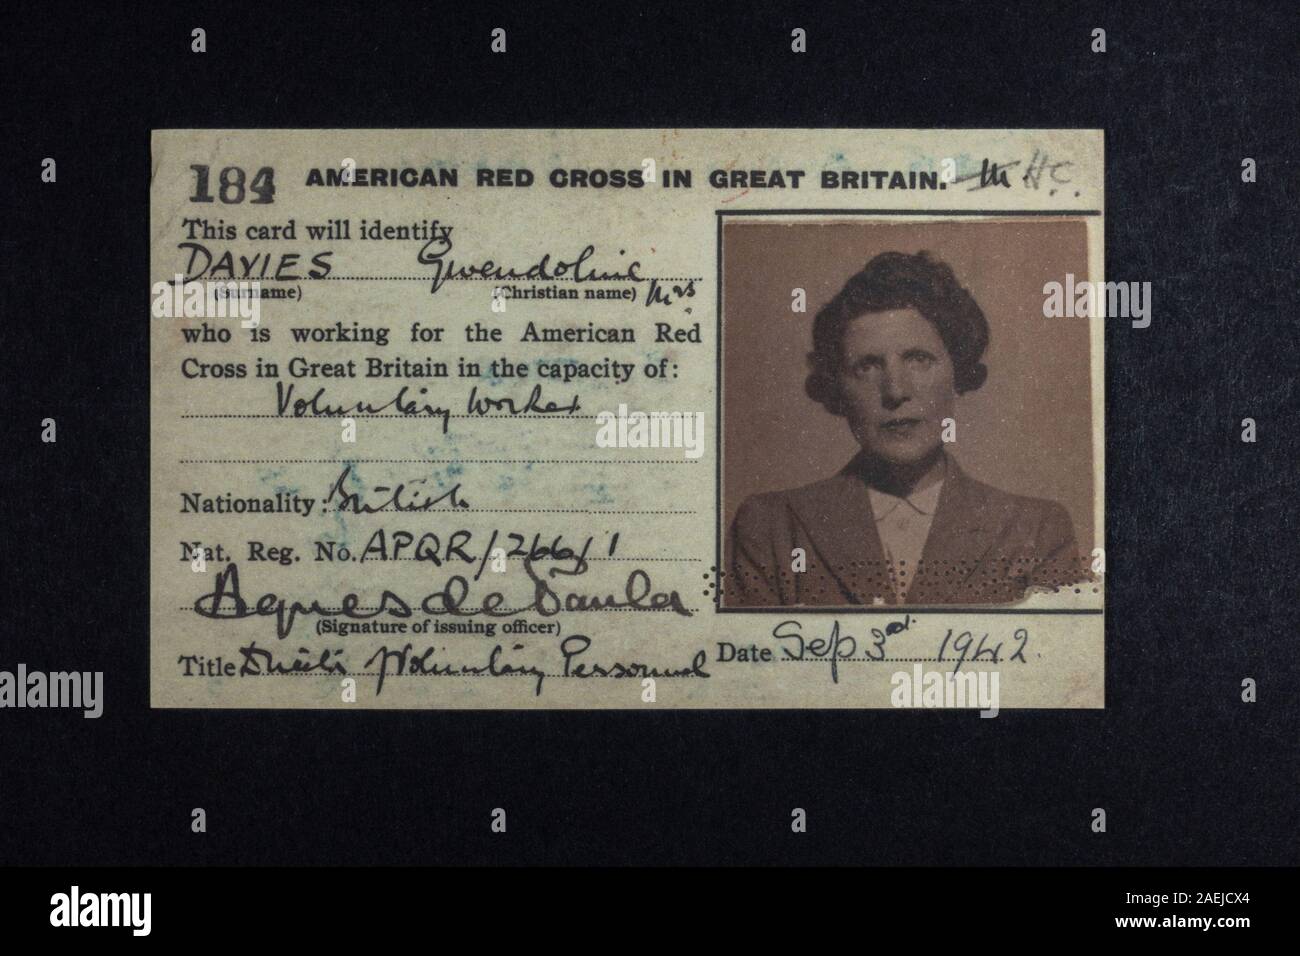 American Red Cross in Great Britain identity card: World War II replica memorabilia relating to Americans ('Yanks') being in the UK. Stock Photo